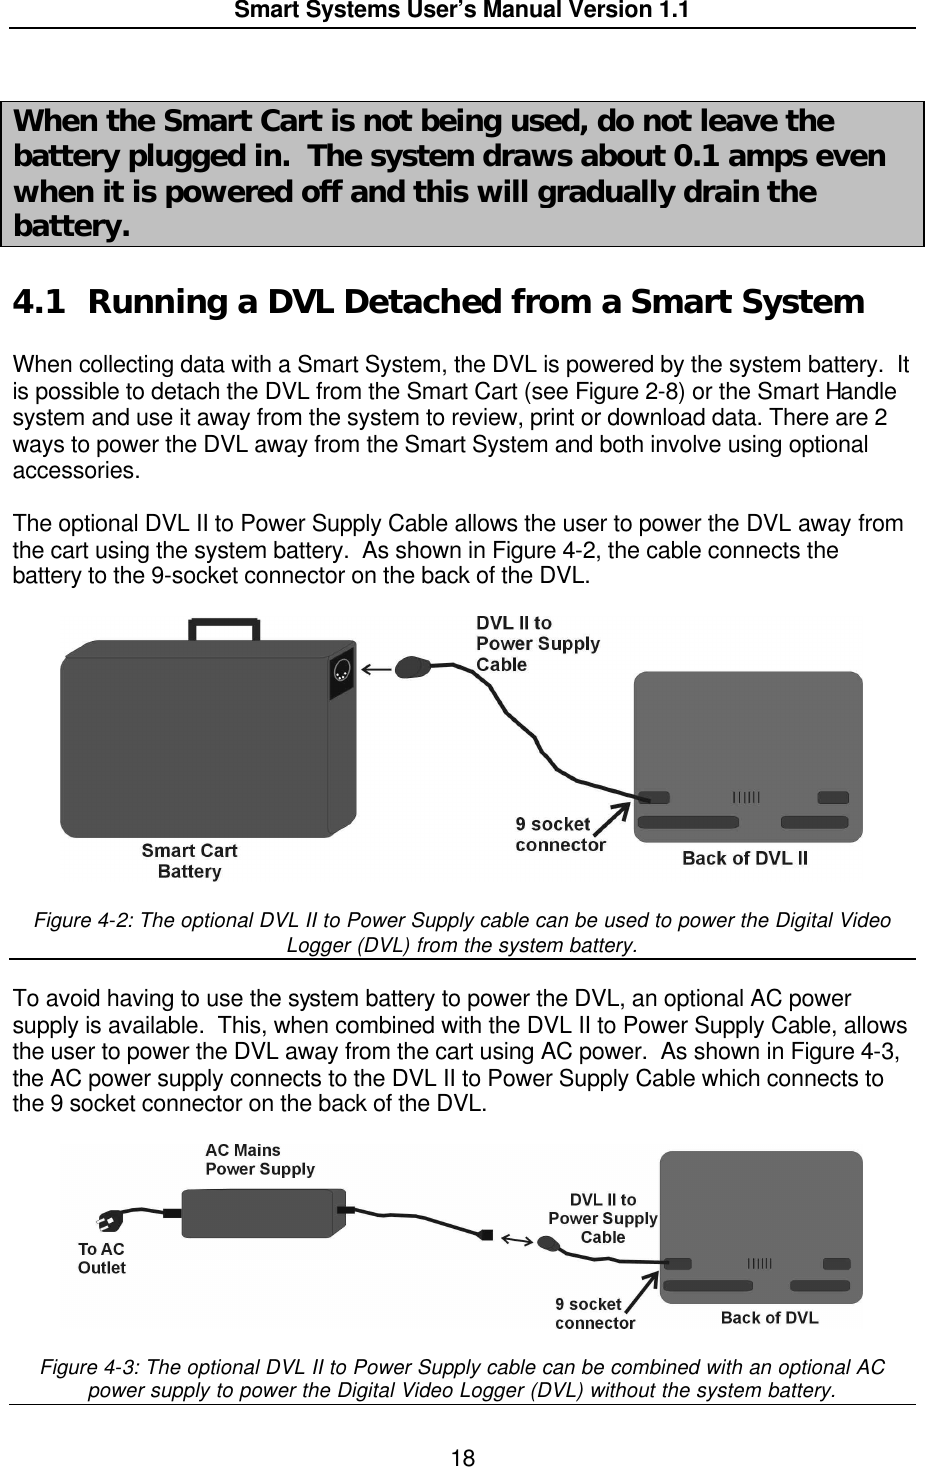  Smart Systems User’s Manual Version 1.1  18   When the Smart Cart is not being used, do not leave the battery plugged in.  The system draws about 0.1 amps even when it is powered off and this will gradually drain the battery.  4.1 Running a DVL Detached from a Smart System  When collecting data with a Smart System, the DVL is powered by the system battery.  It is possible to detach the DVL from the Smart Cart (see Figure 2-8) or the Smart Handle system and use it away from the system to review, print or download data. There are 2 ways to power the DVL away from the Smart System and both involve using optional accessories.    The optional DVL II to Power Supply Cable allows the user to power the DVL away from the cart using the system battery.  As shown in Figure 4-2, the cable connects the battery to the 9-socket connector on the back of the DVL.     Figure 4-2: The optional DVL II to Power Supply cable can be used to power the Digital Video Logger (DVL) from the system battery.  To avoid having to use the system battery to power the DVL, an optional AC power supply is available.  This, when combined with the DVL II to Power Supply Cable, allows the user to power the DVL away from the cart using AC power.  As shown in Figure 4-3, the AC power supply connects to the DVL II to Power Supply Cable which connects to the 9 socket connector on the back of the DVL.     Figure 4-3: The optional DVL II to Power Supply cable can be combined with an optional AC power supply to power the Digital Video Logger (DVL) without the system battery. 